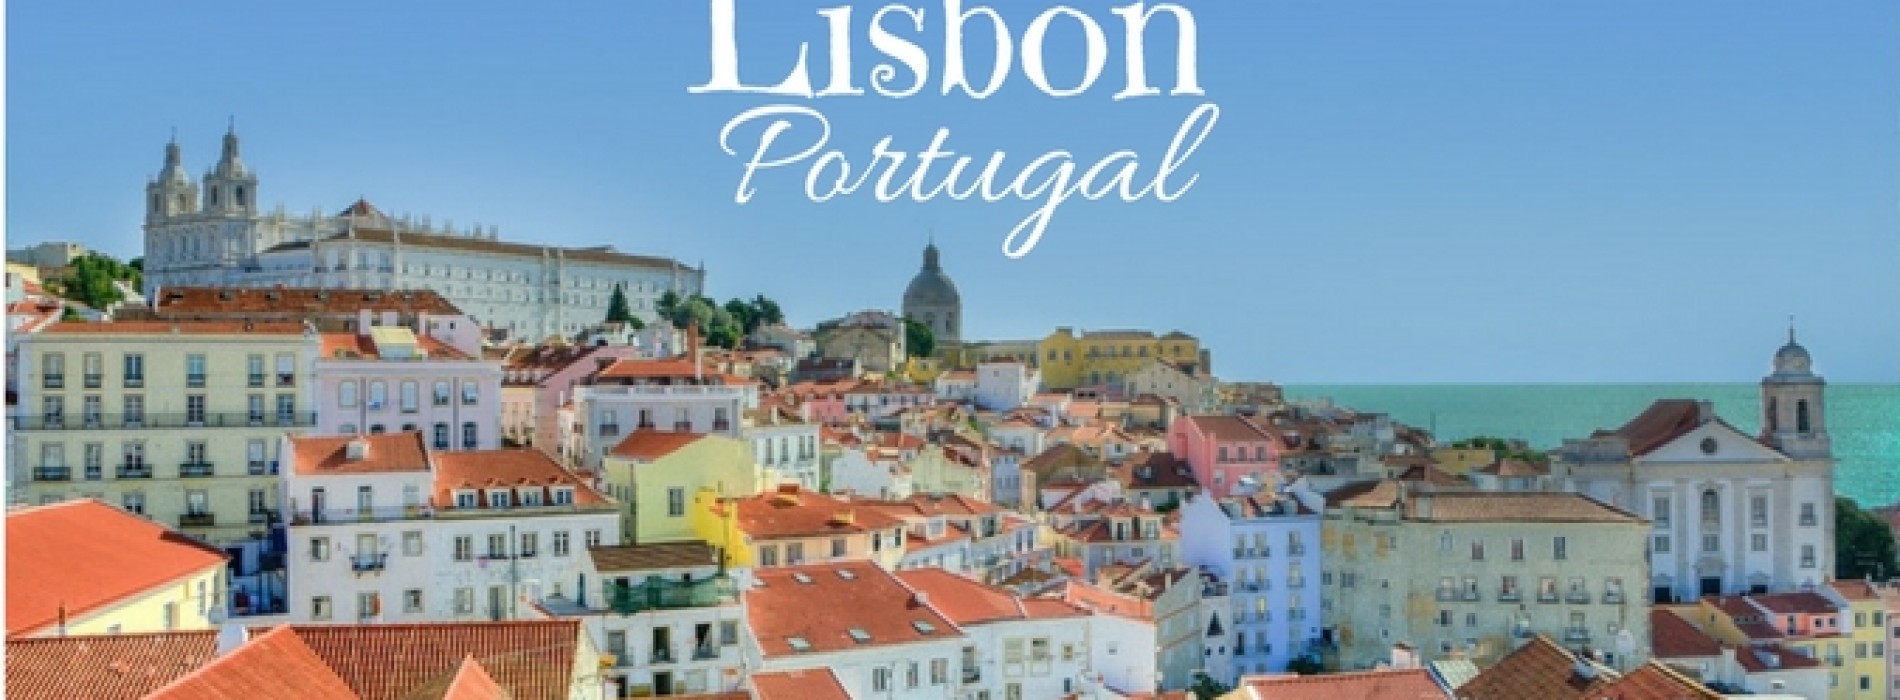 Get ready to be inspired by Lisbon to live your life today